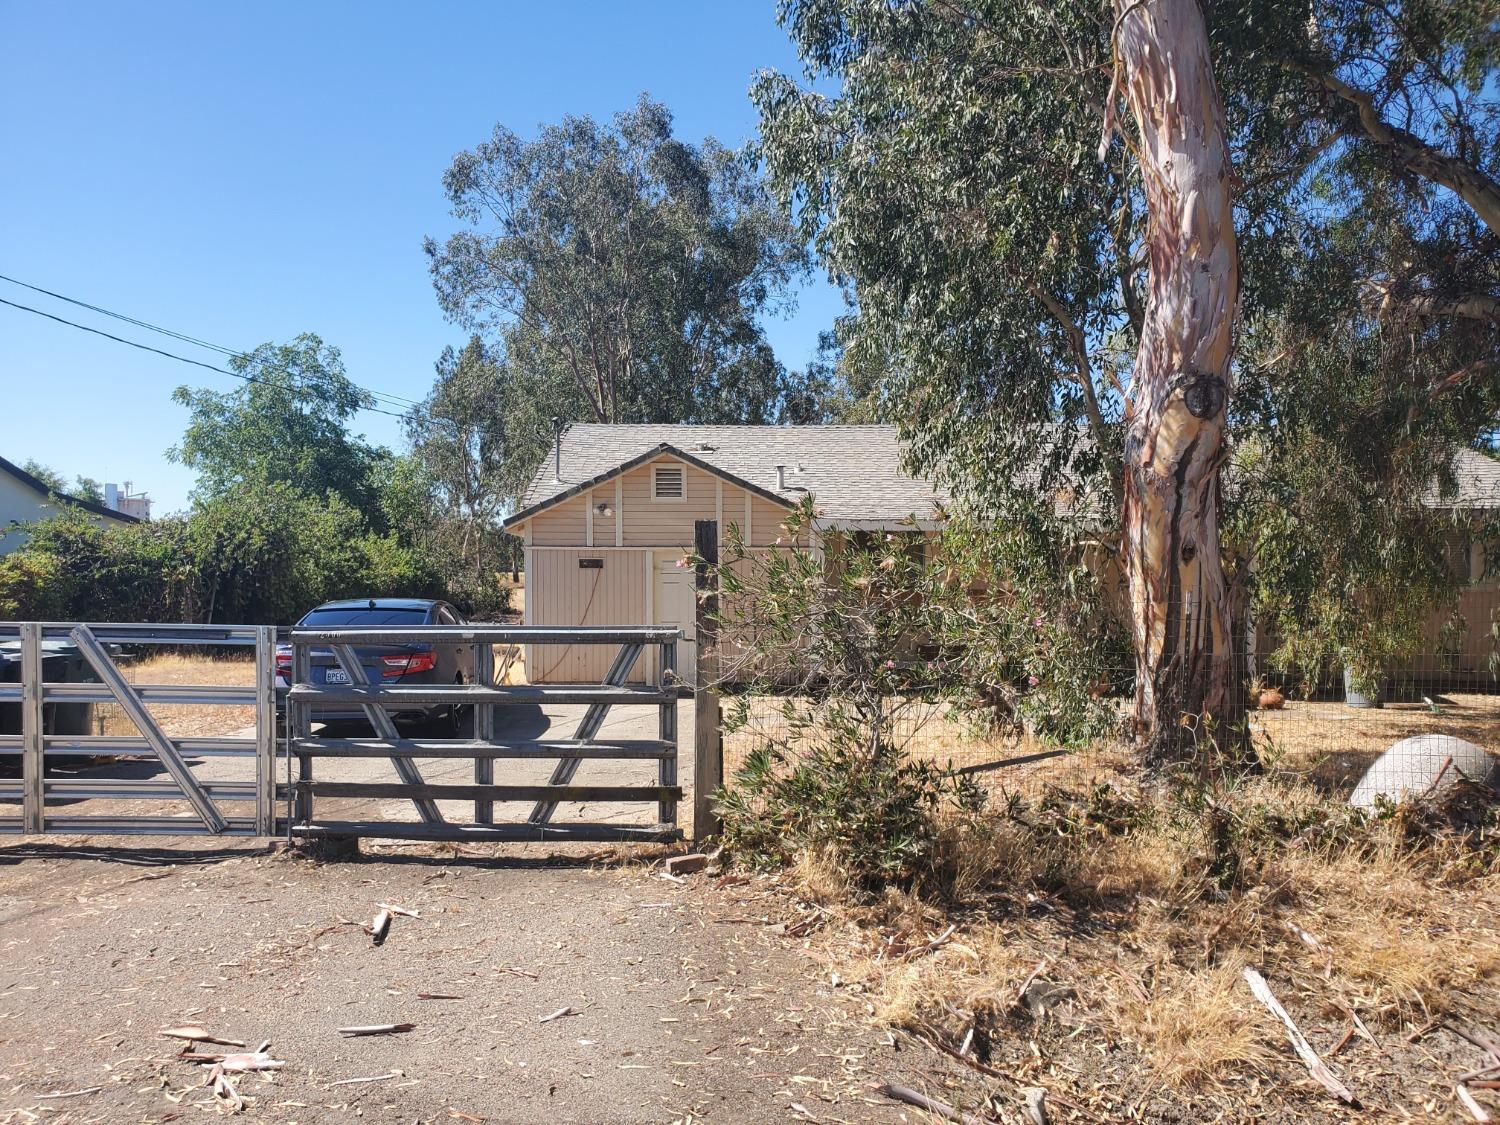 Opportunity to own almost an acre! A 3 bedroom 1 1/2 bath home being sold as-is. Country living, zon